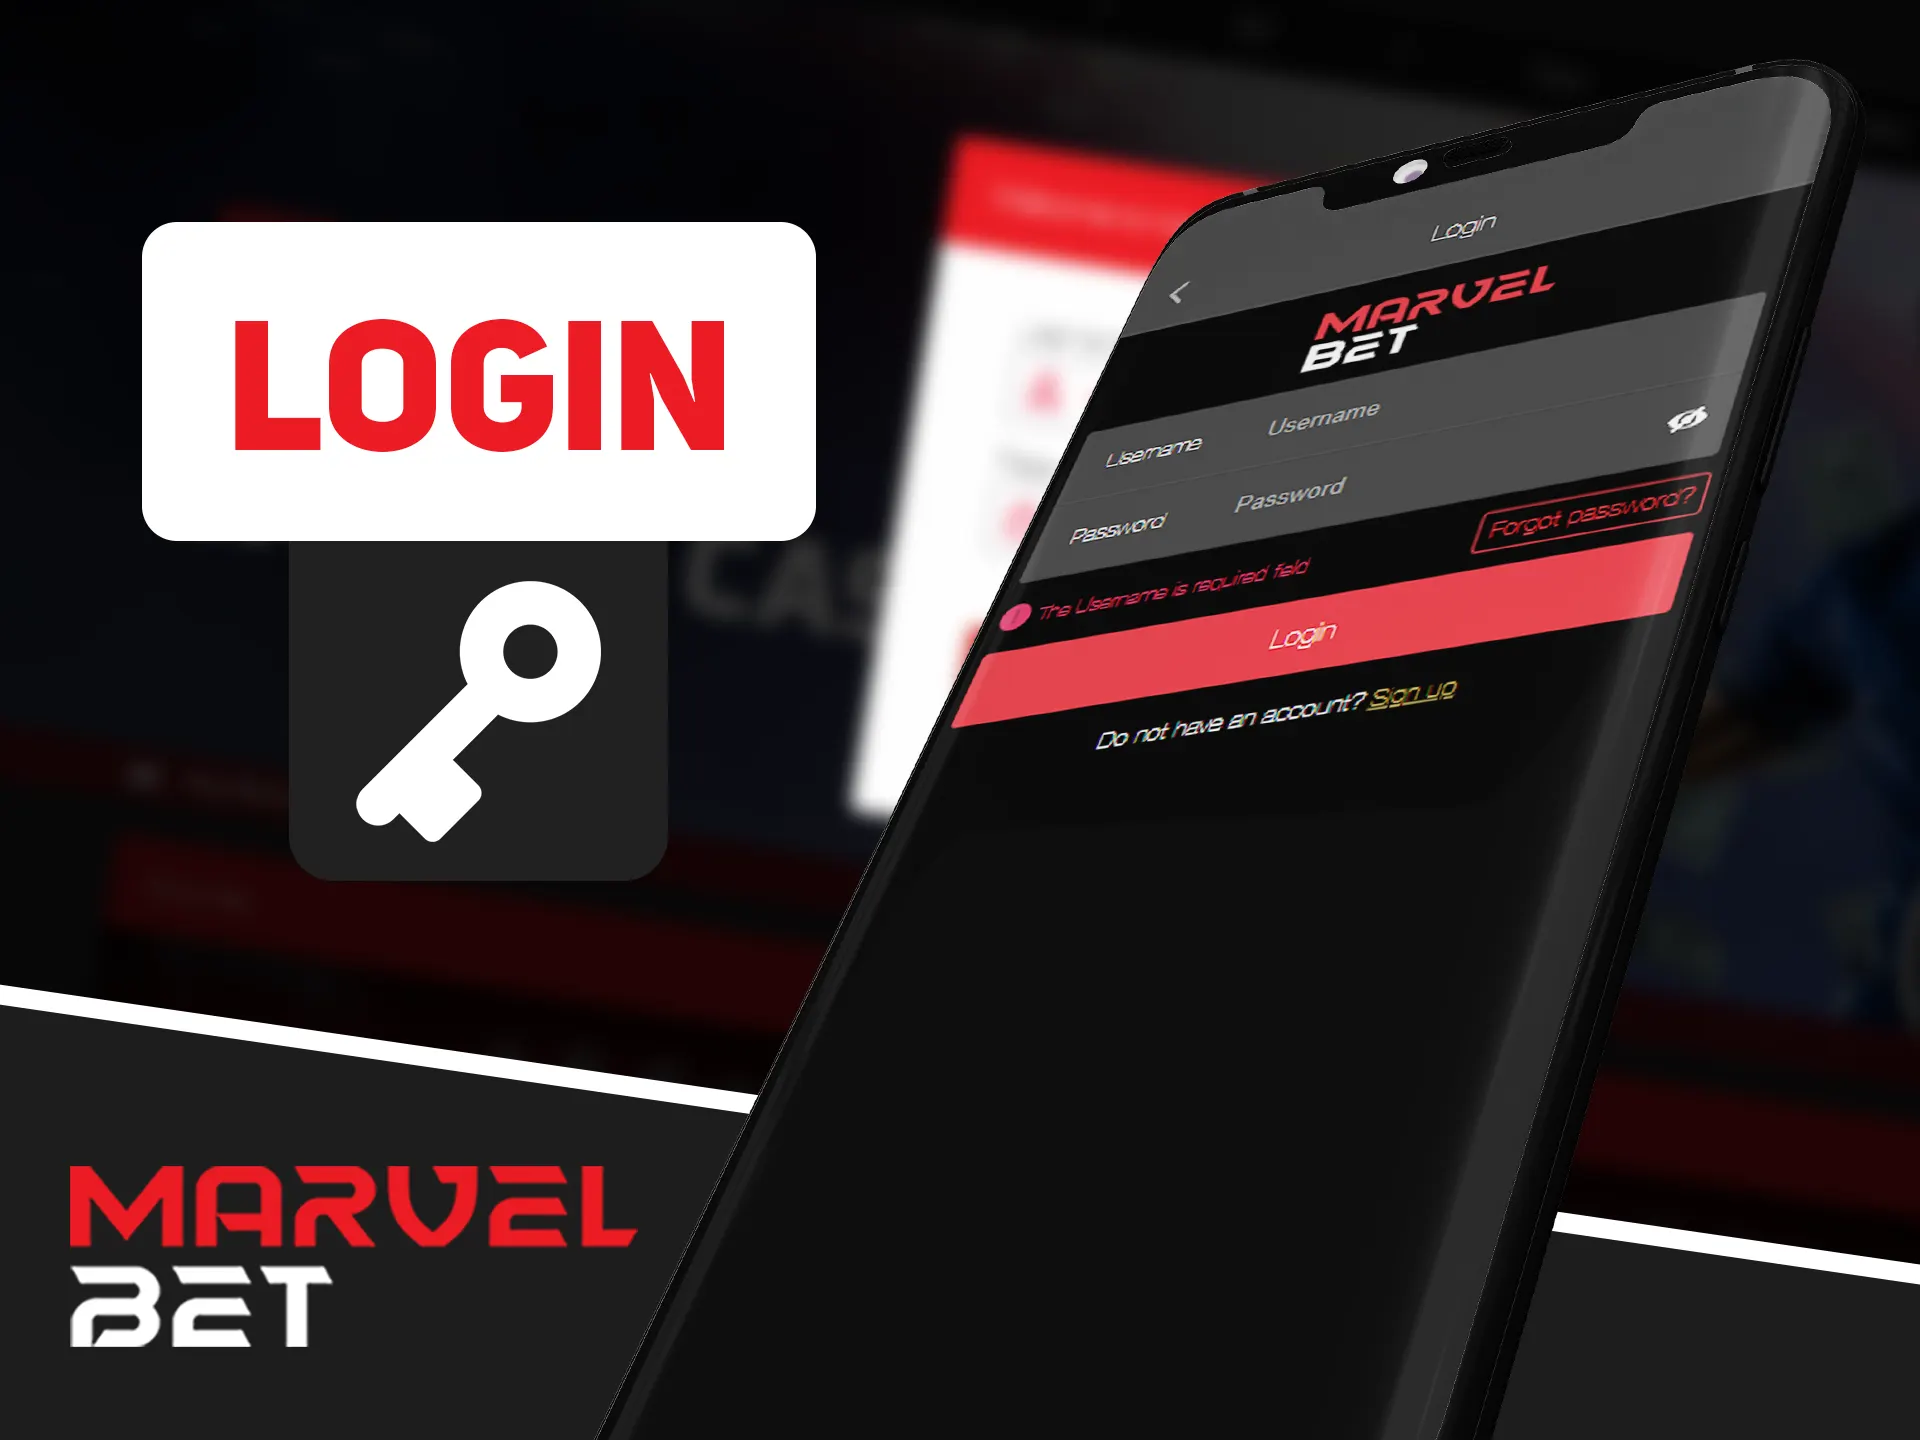 Log in in app by using your Marvelbet account.